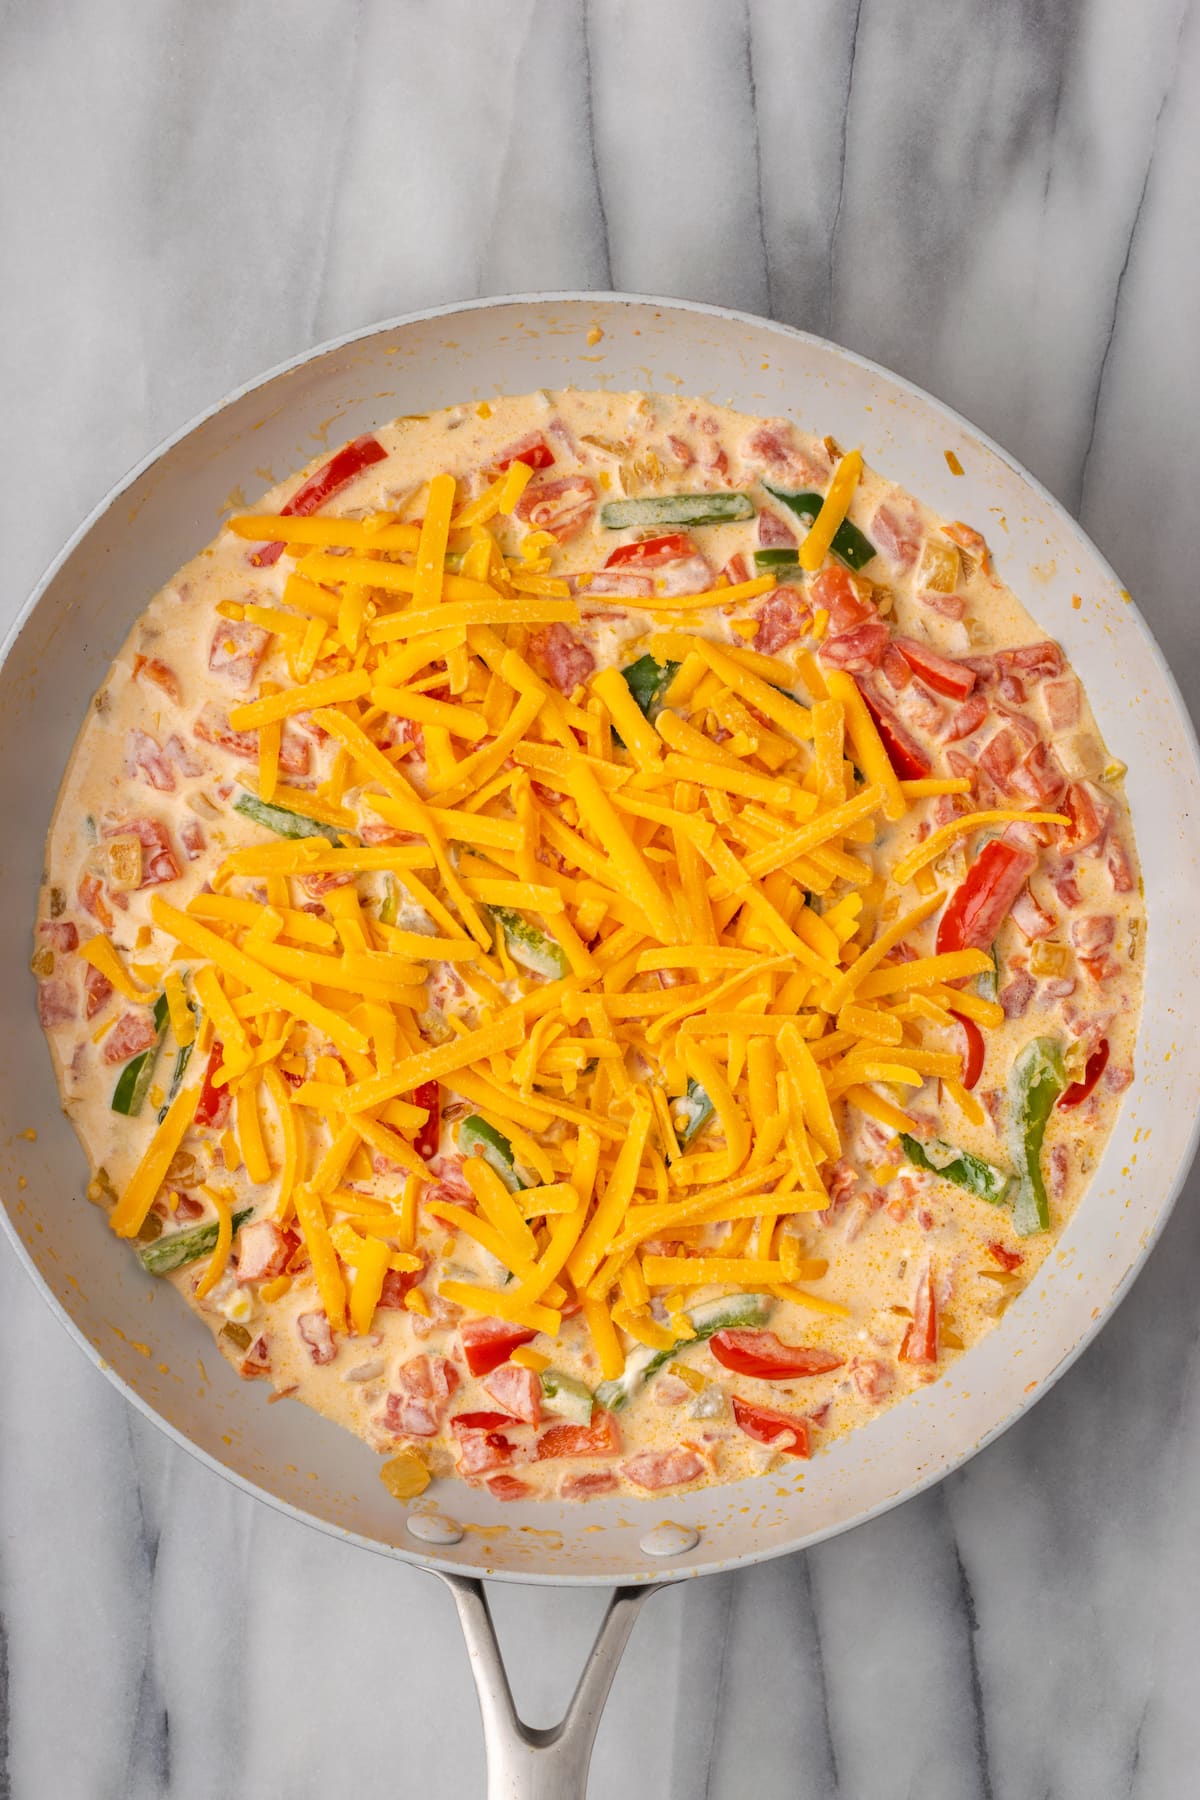 Overhead view of unmelted cheese on top of a sauce in a skillet